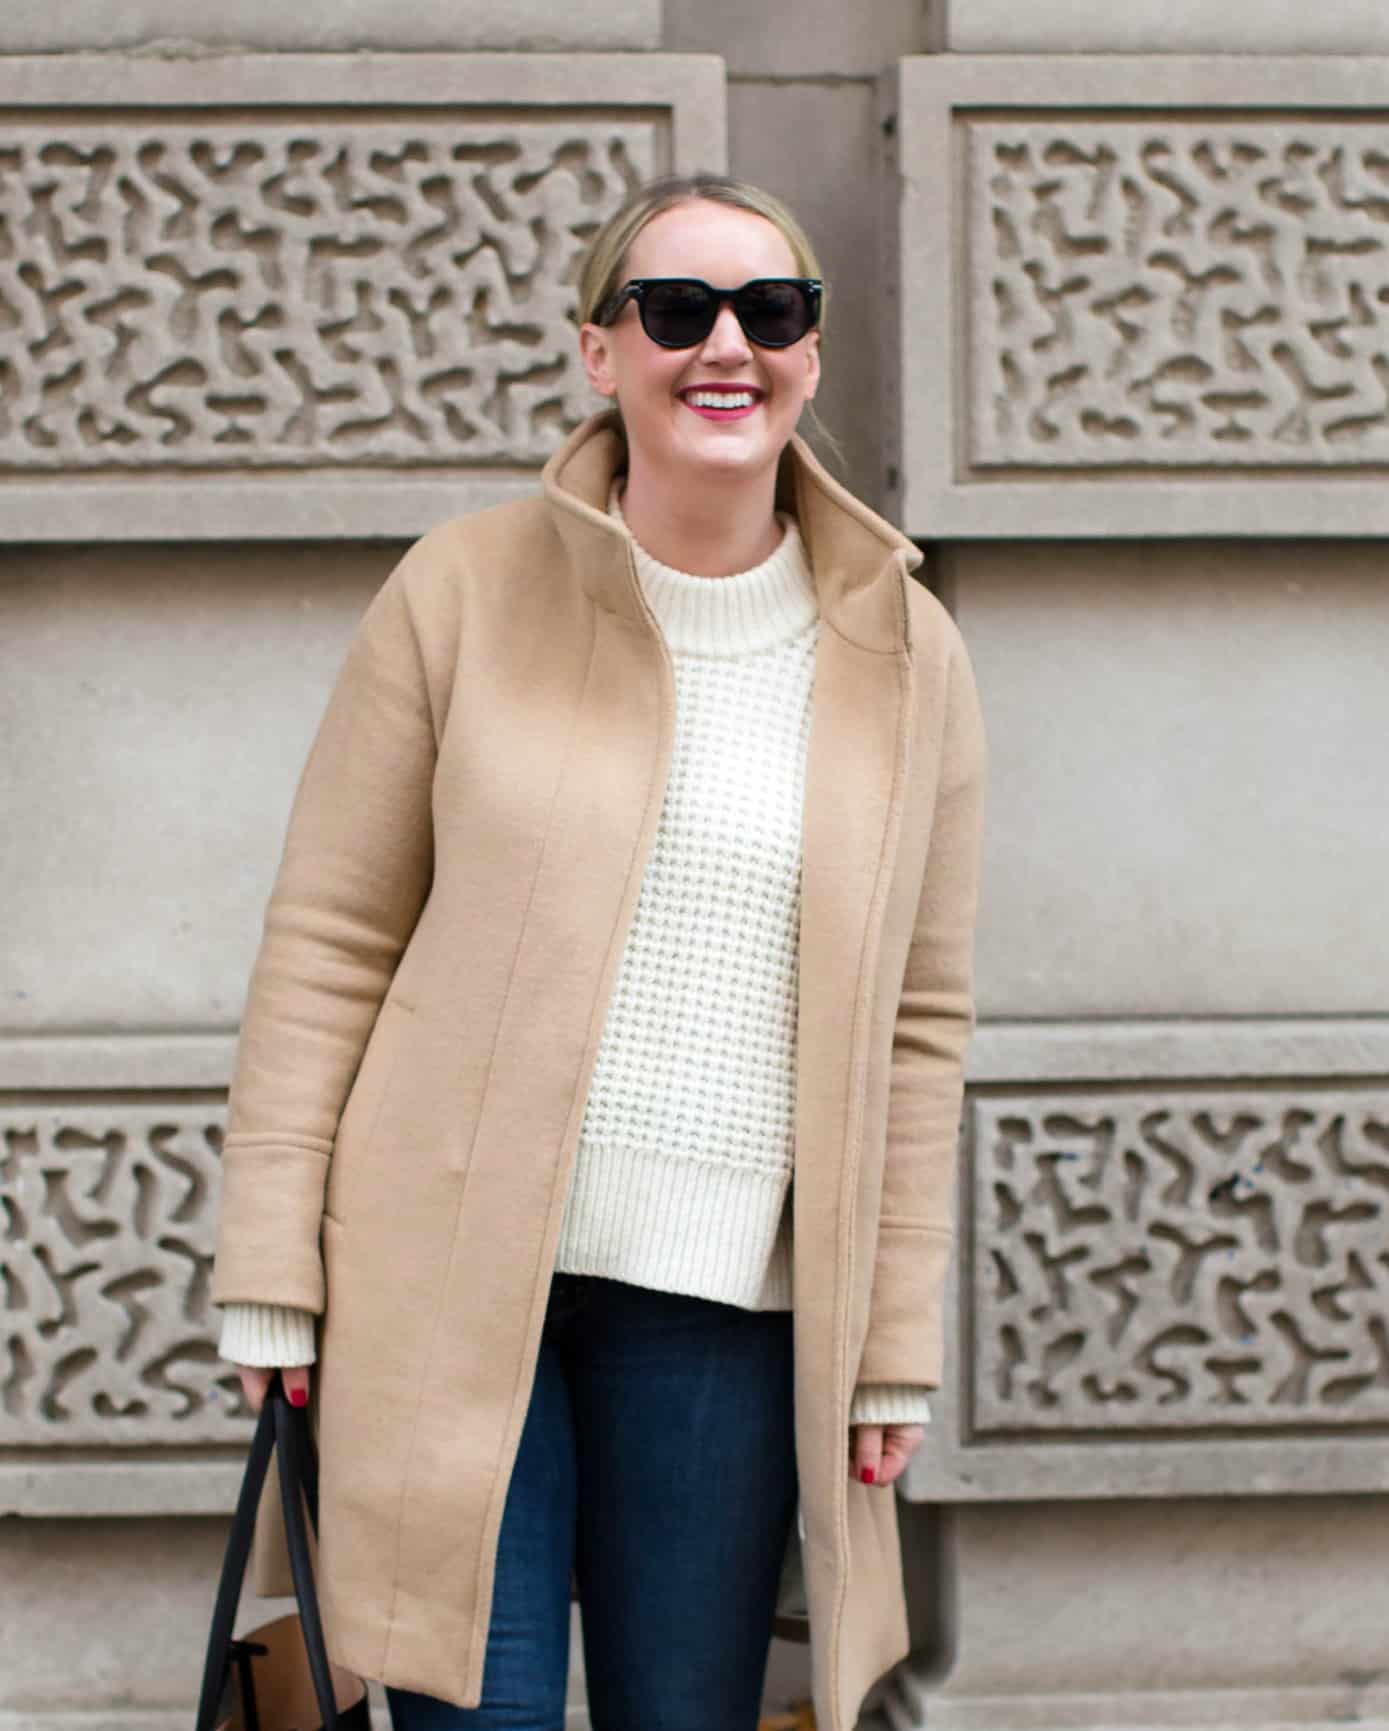 Camel Coat + Cream Sweater styled by Meghan Donovan of wit & whimsy